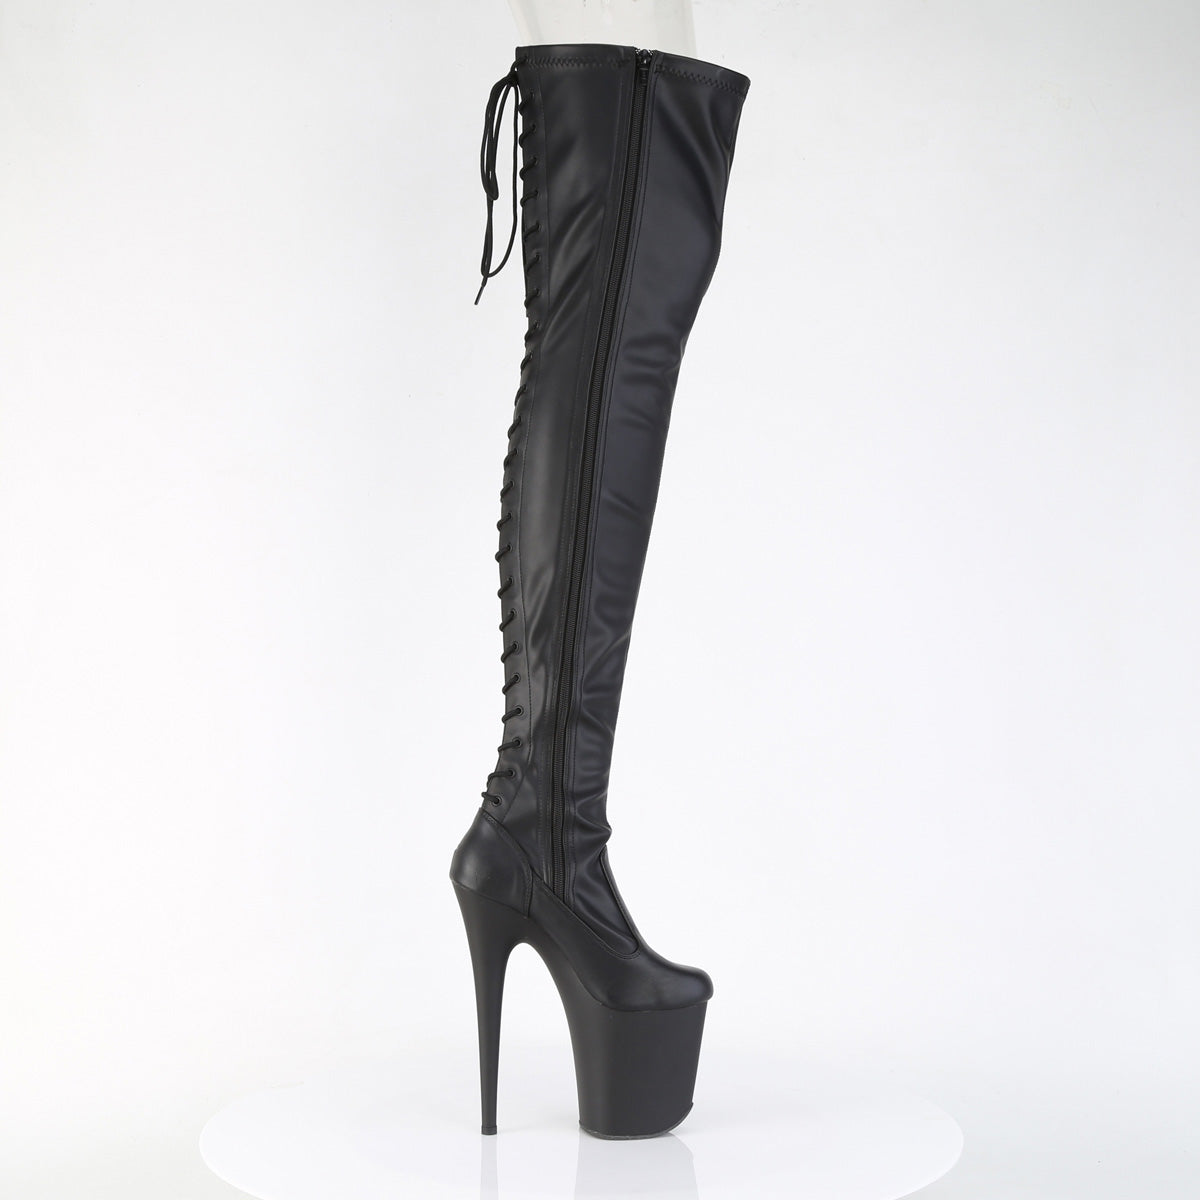 FLAMINGO-3850 Lace-Up Back Stretch Thigh Boot Black Multi view 2